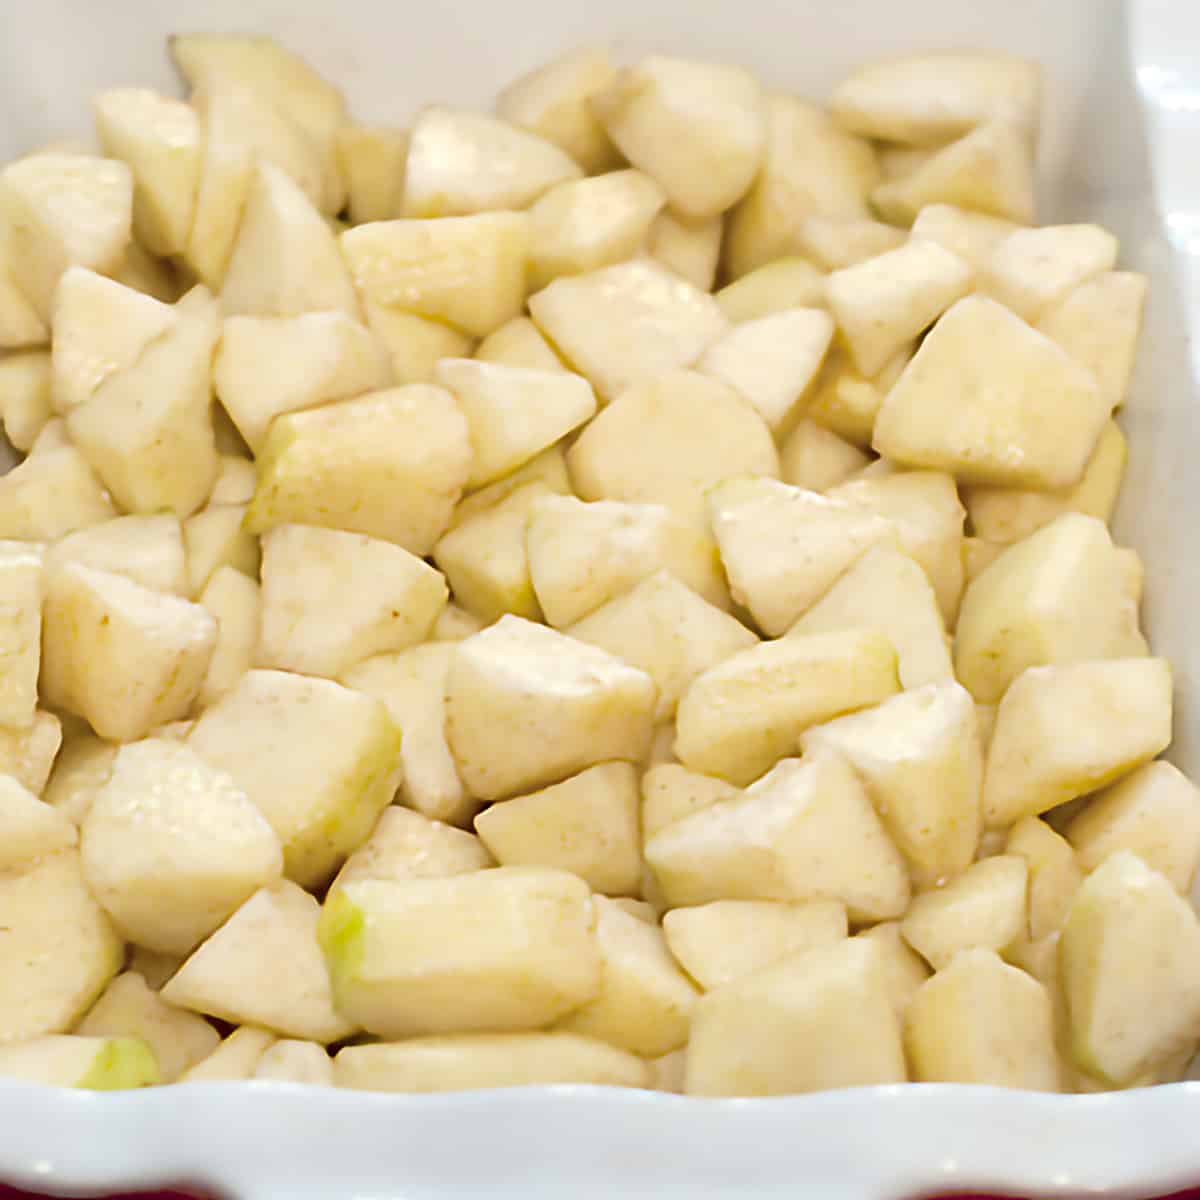 Prepared apples in a baking dish